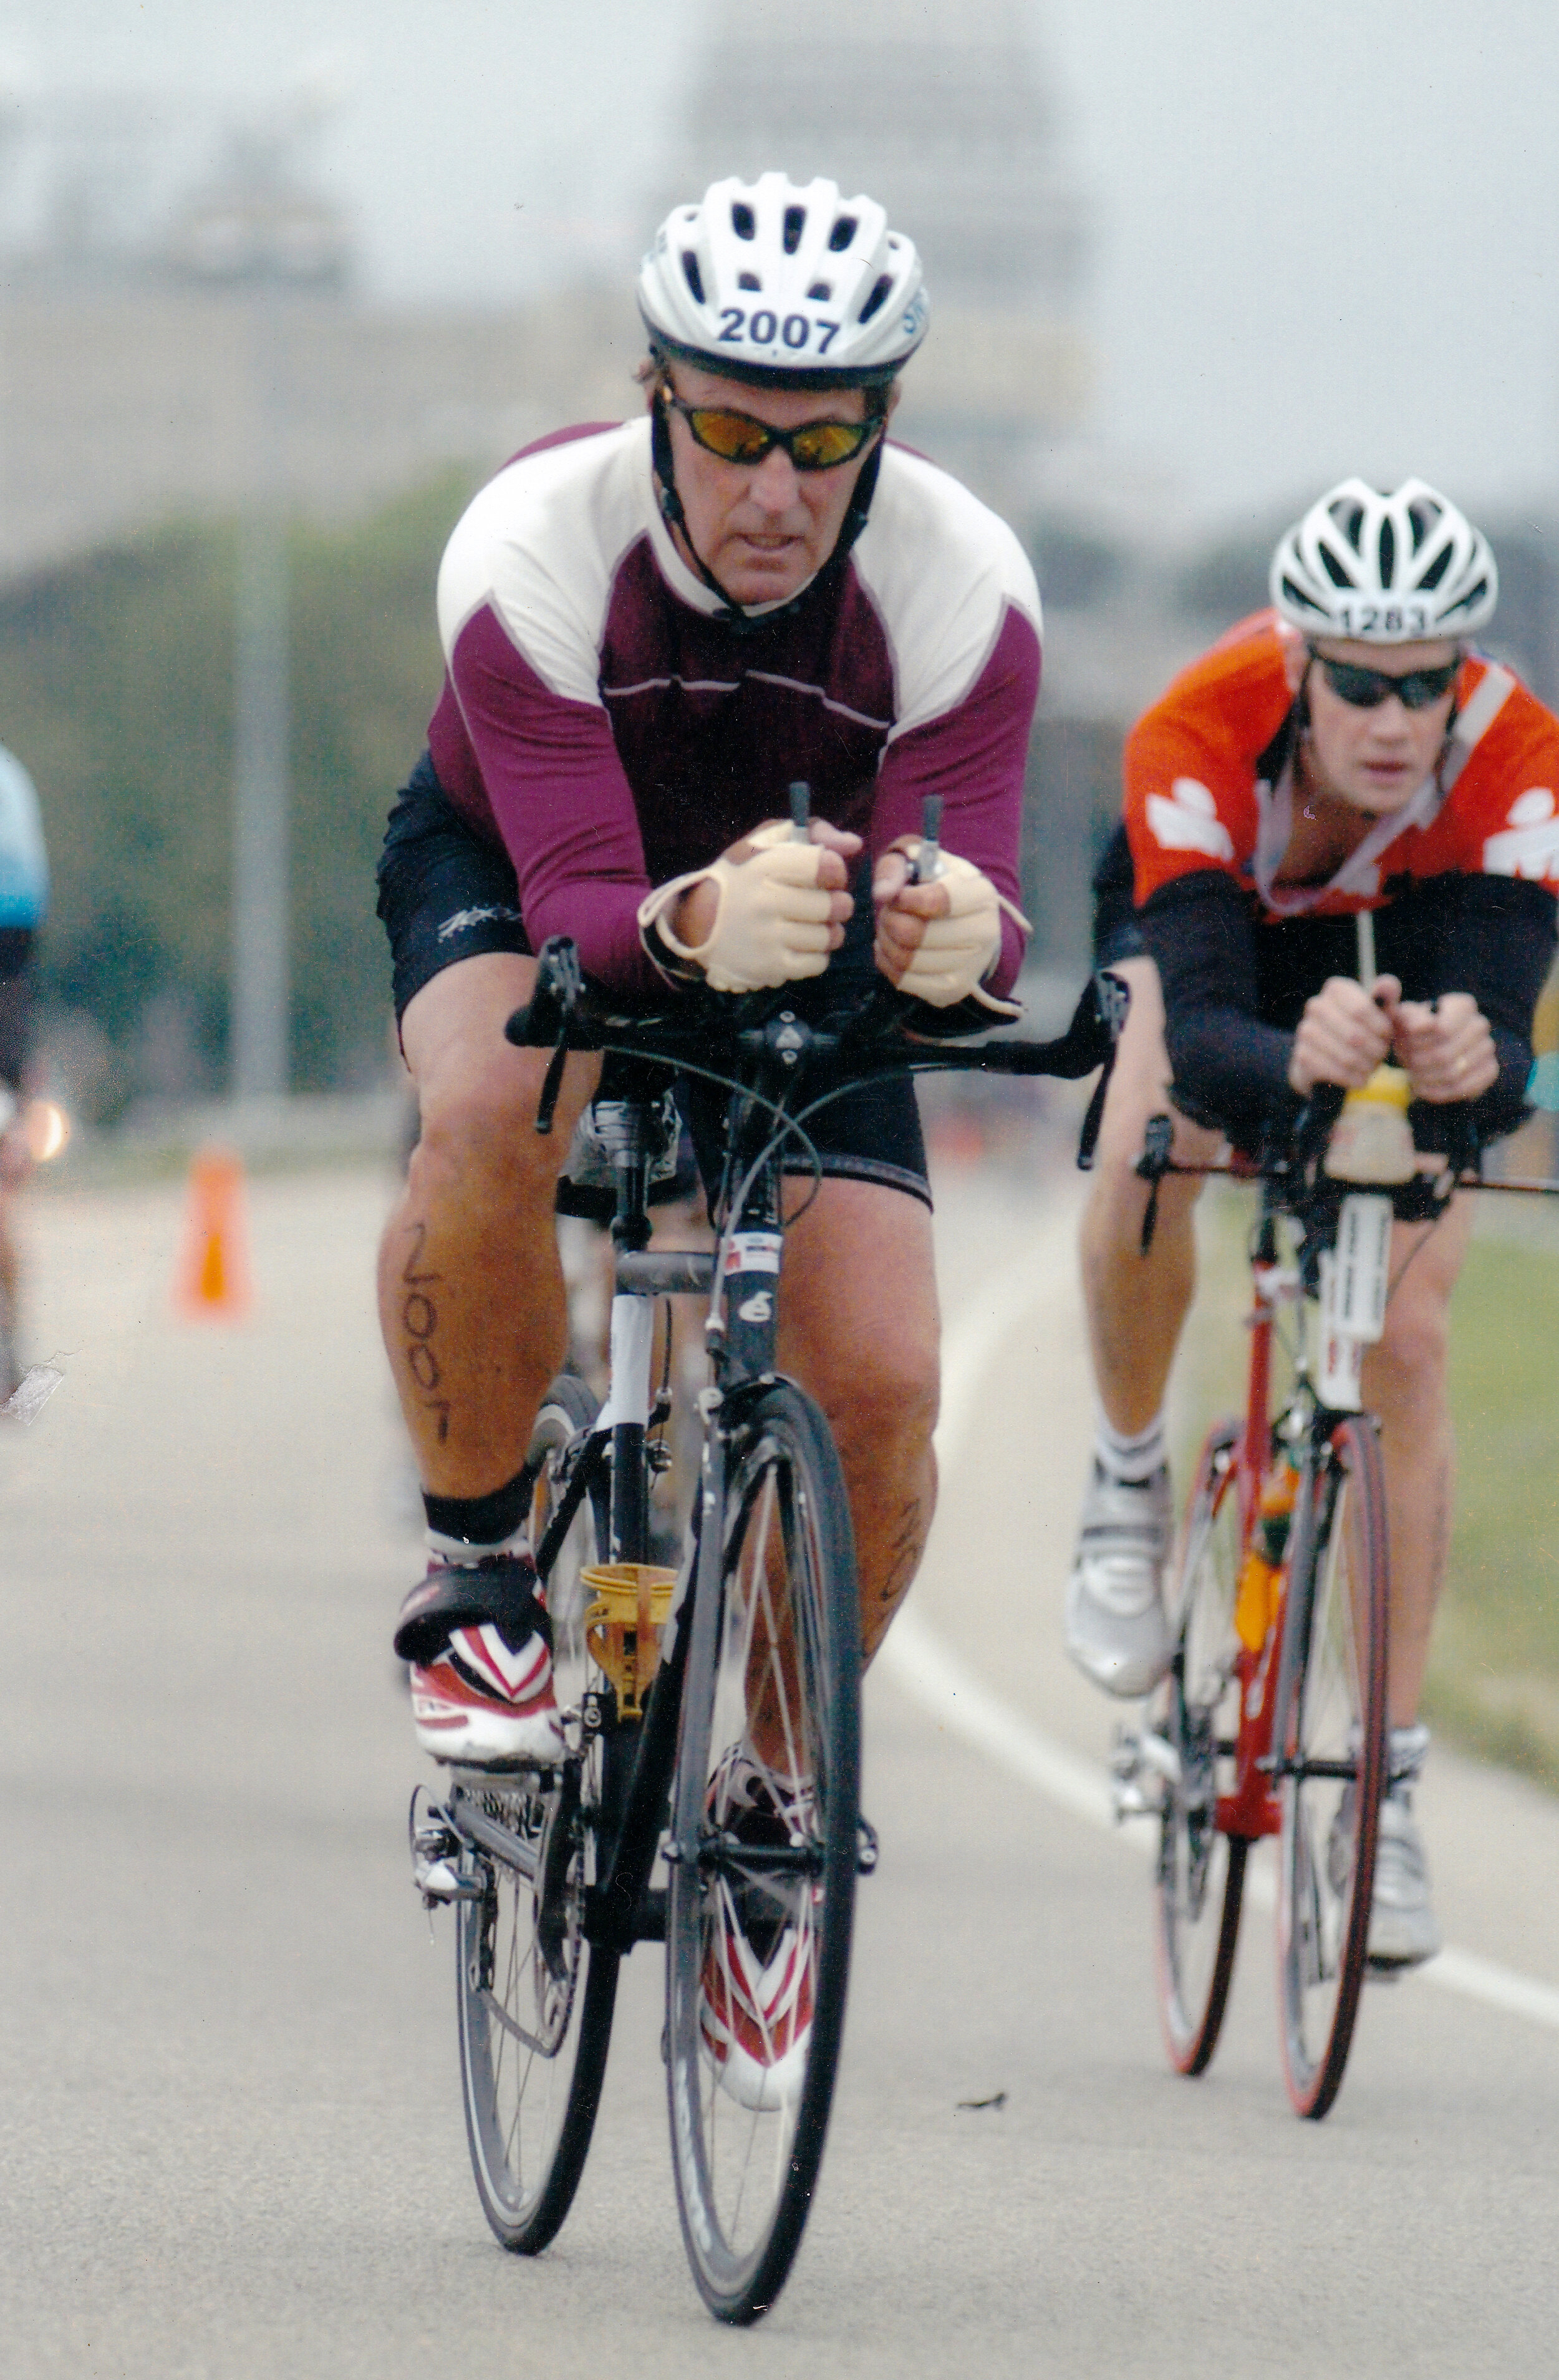 Mike Smith at Ironman 2007 where he is seen in the 122.6-mile bike portion of the competition.